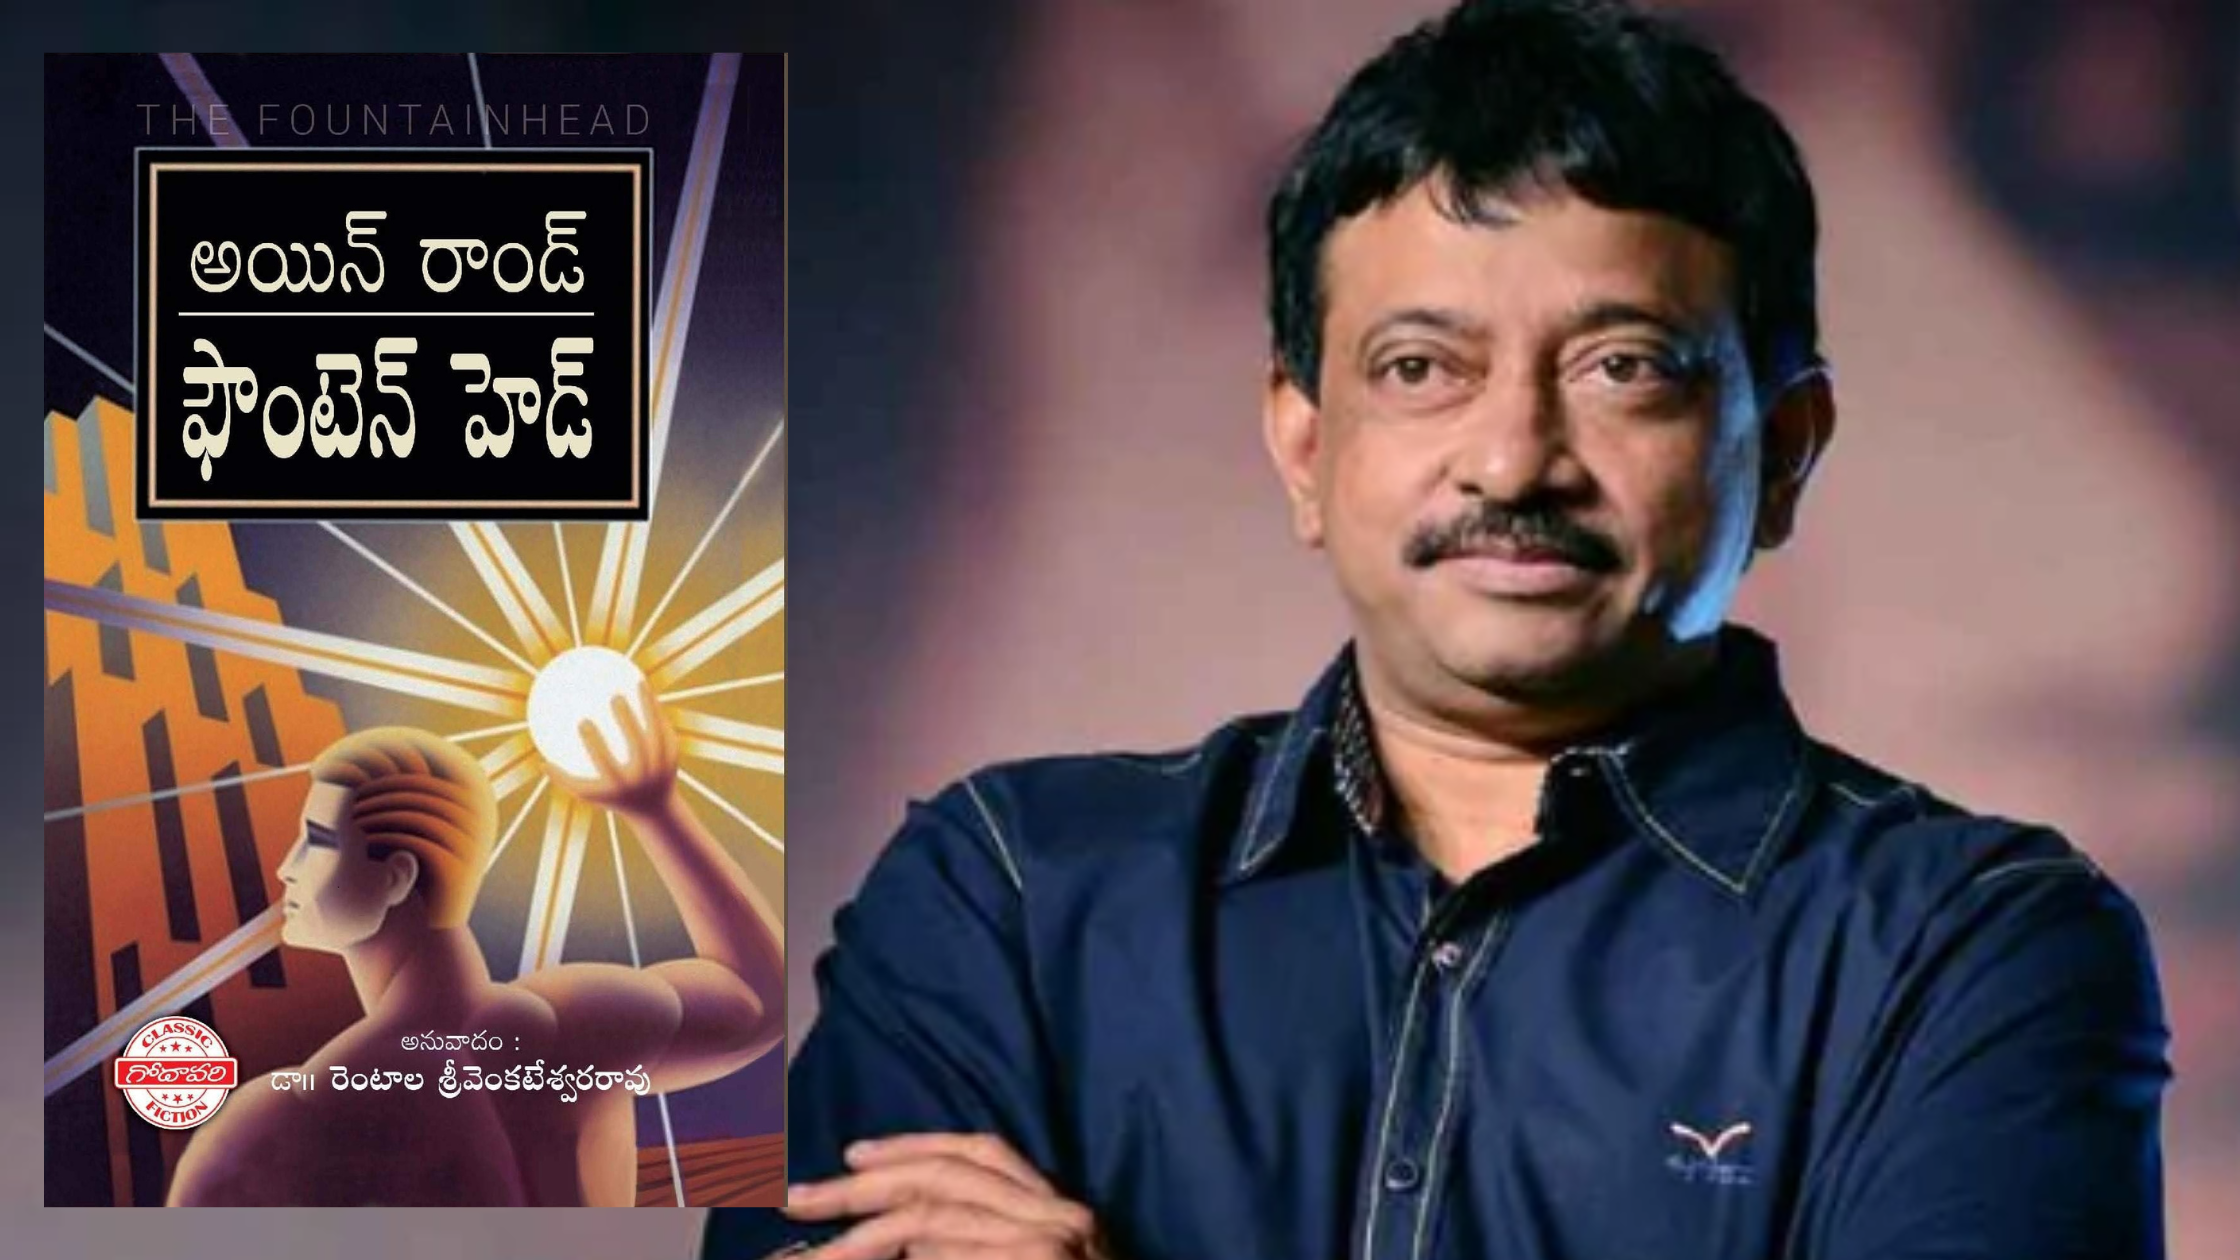 Review-of-Ramgopal-Varma-on-The -Fountainhead